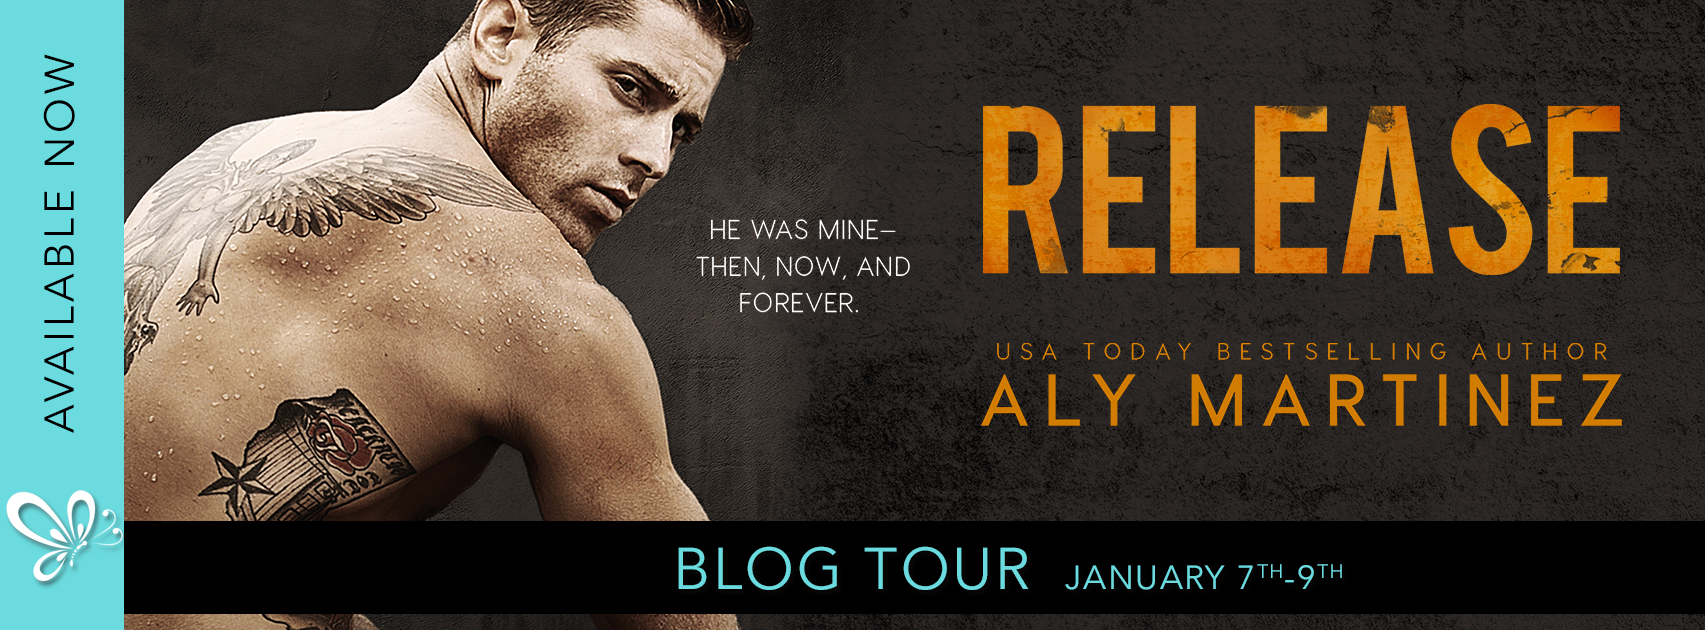 Blog Tour: Release by Aly Martinez